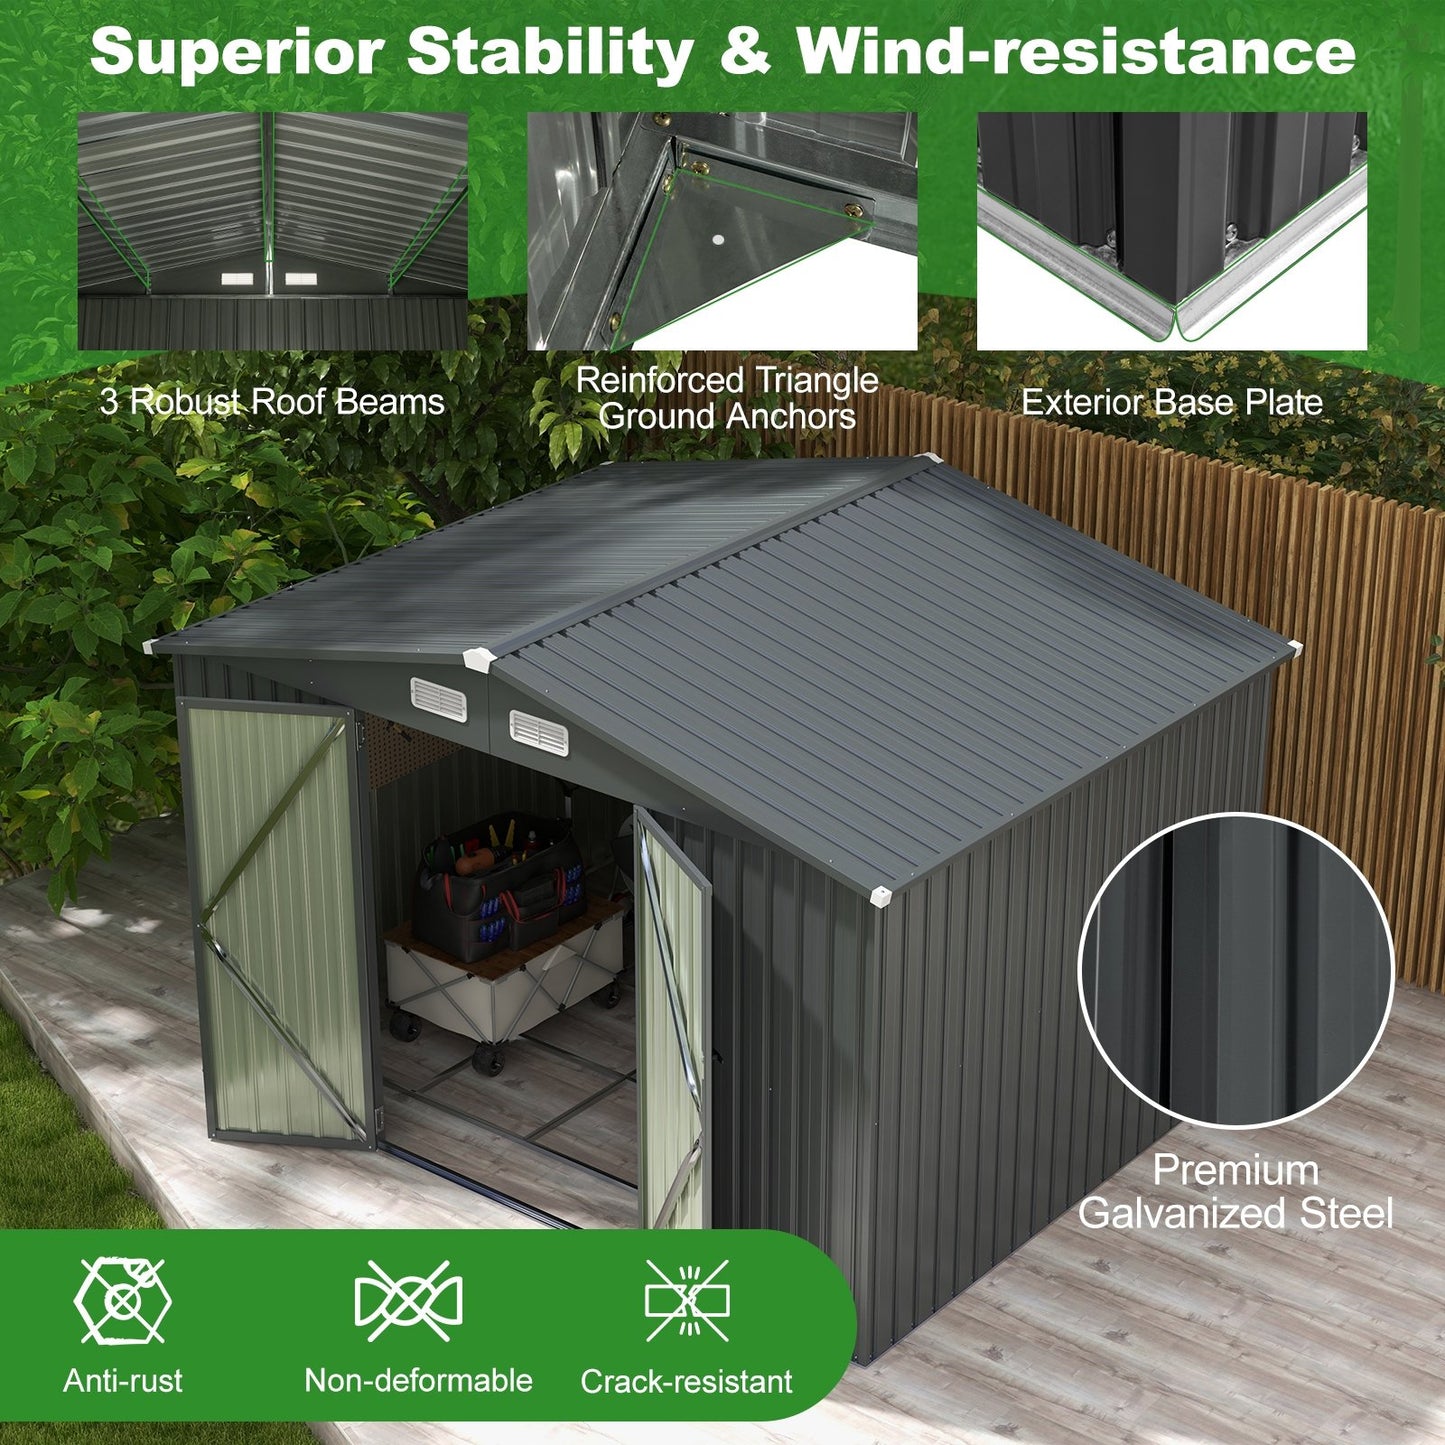 6.3 x 3.5 /10 x 7.7 Feet Galvanized Metal Storage Shed with Vents and Base Floor-10 ft, Dark Gray